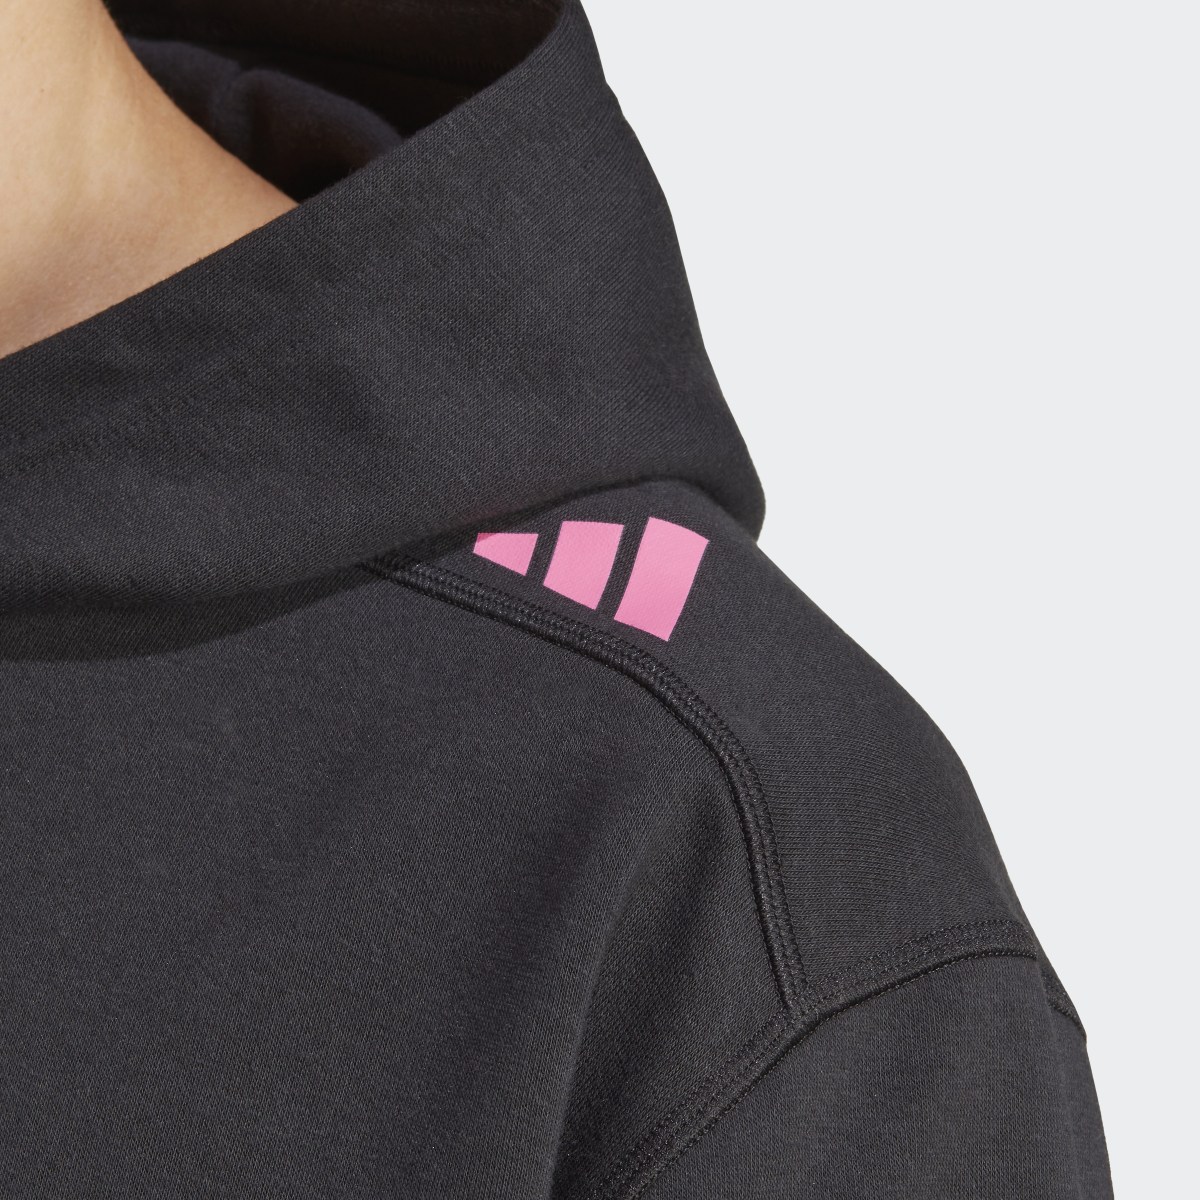 Adidas HIIT Hoodie Curated By Cody Rigsby. 6